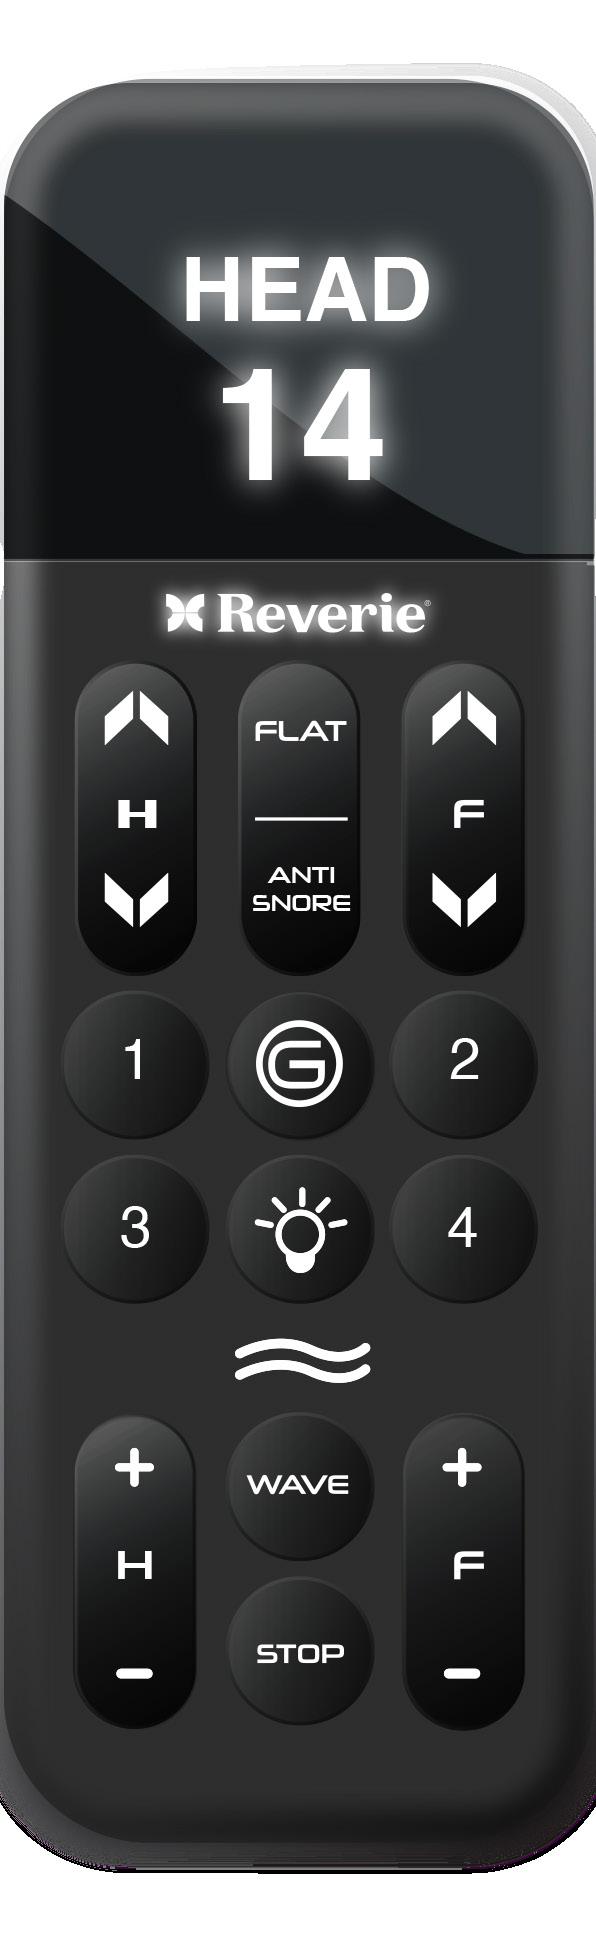 Wireless Remote Control DISPLAY SCREEN A. RAISE & LOWER HEAD SECTION OF THE BASE B. RAISE & LOWER FOOT SECTION OF THE BASE C. RETURN ALL SECTIONS TO FLAT D. ANTI SNORE E. ZERO GRAVITY F.